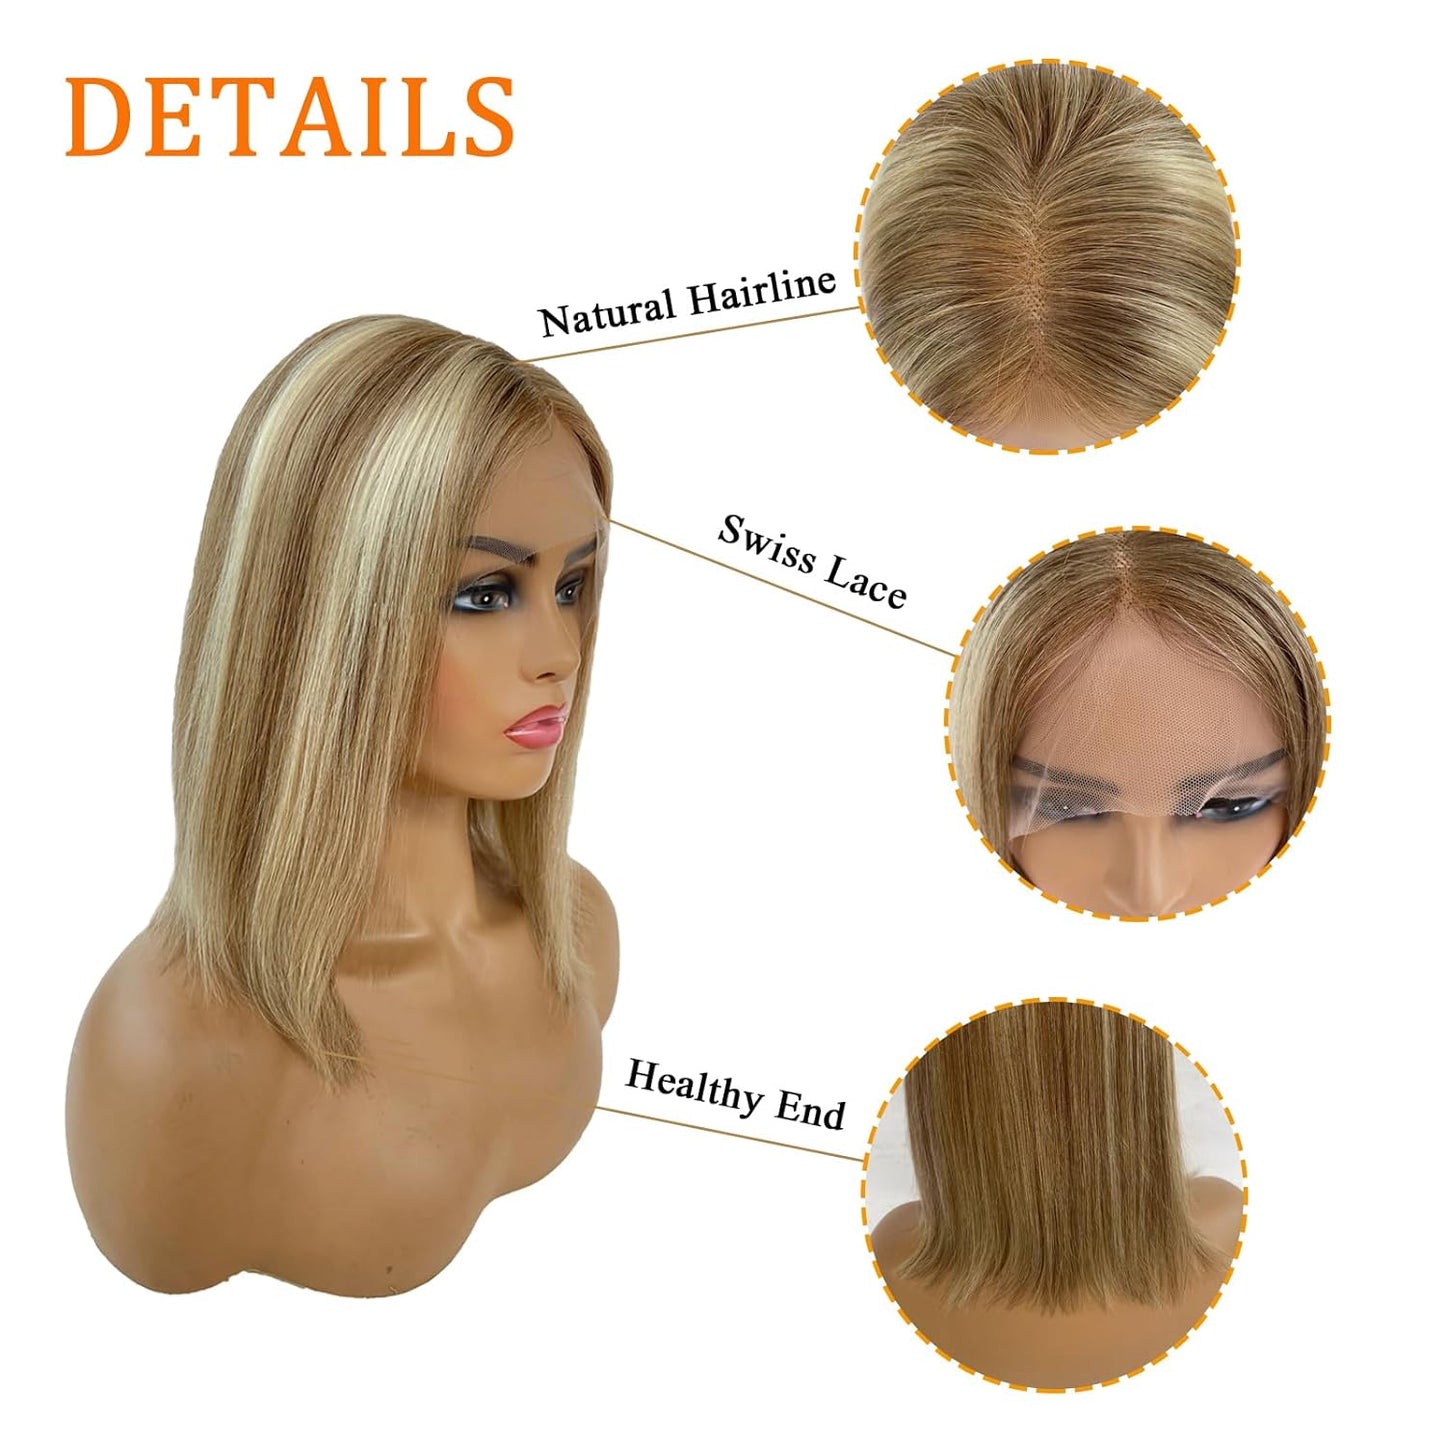 Radiant Transformation: Brown to Blonde Highlight Short Chin-Length Bob Wig - Straight Human Hair for White Women's Women with Alopecia, Cancer Chemo, and Hair Loss! Hair Alternative &amp; Hair Replacement